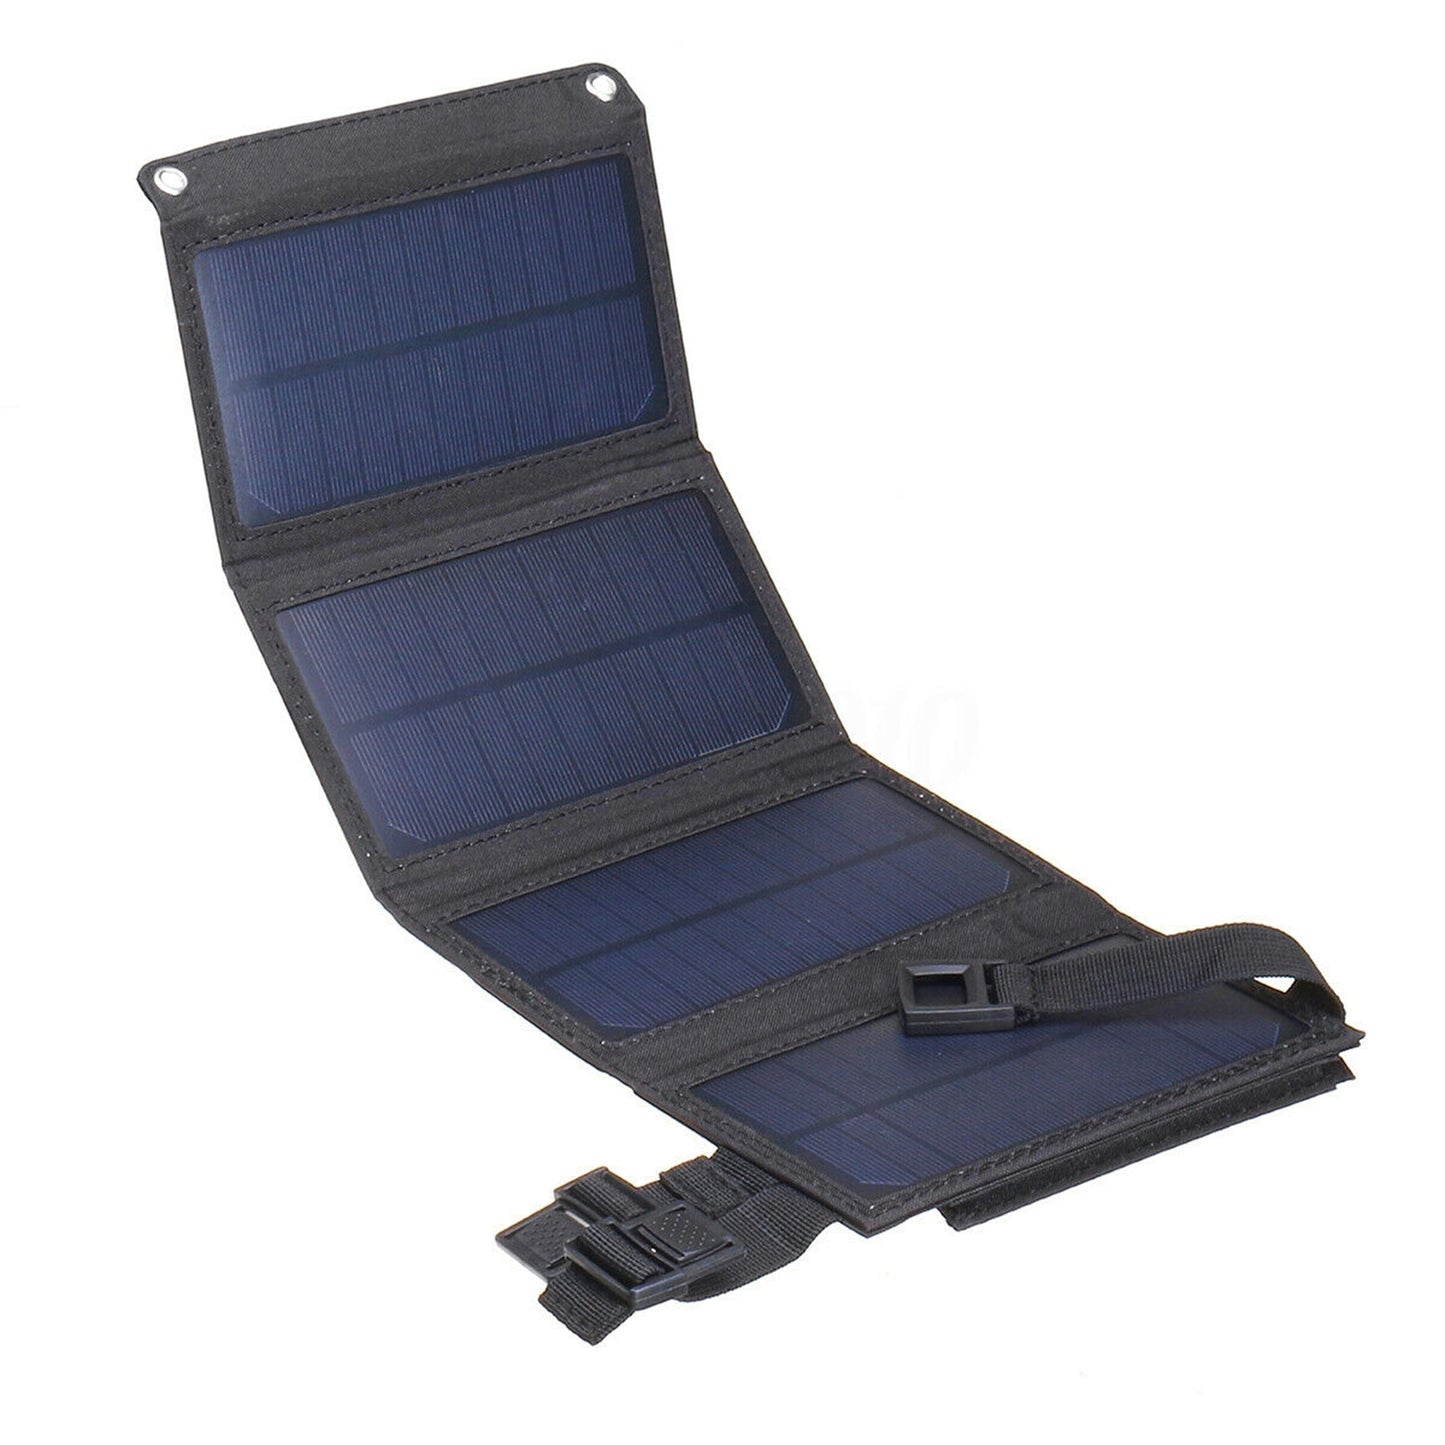 15/20W 5V Solar Panel Outdoor Camping Hiking Foldable USB Solar Panels Portable Power Bank Battery Solar Charger for Cell Phone